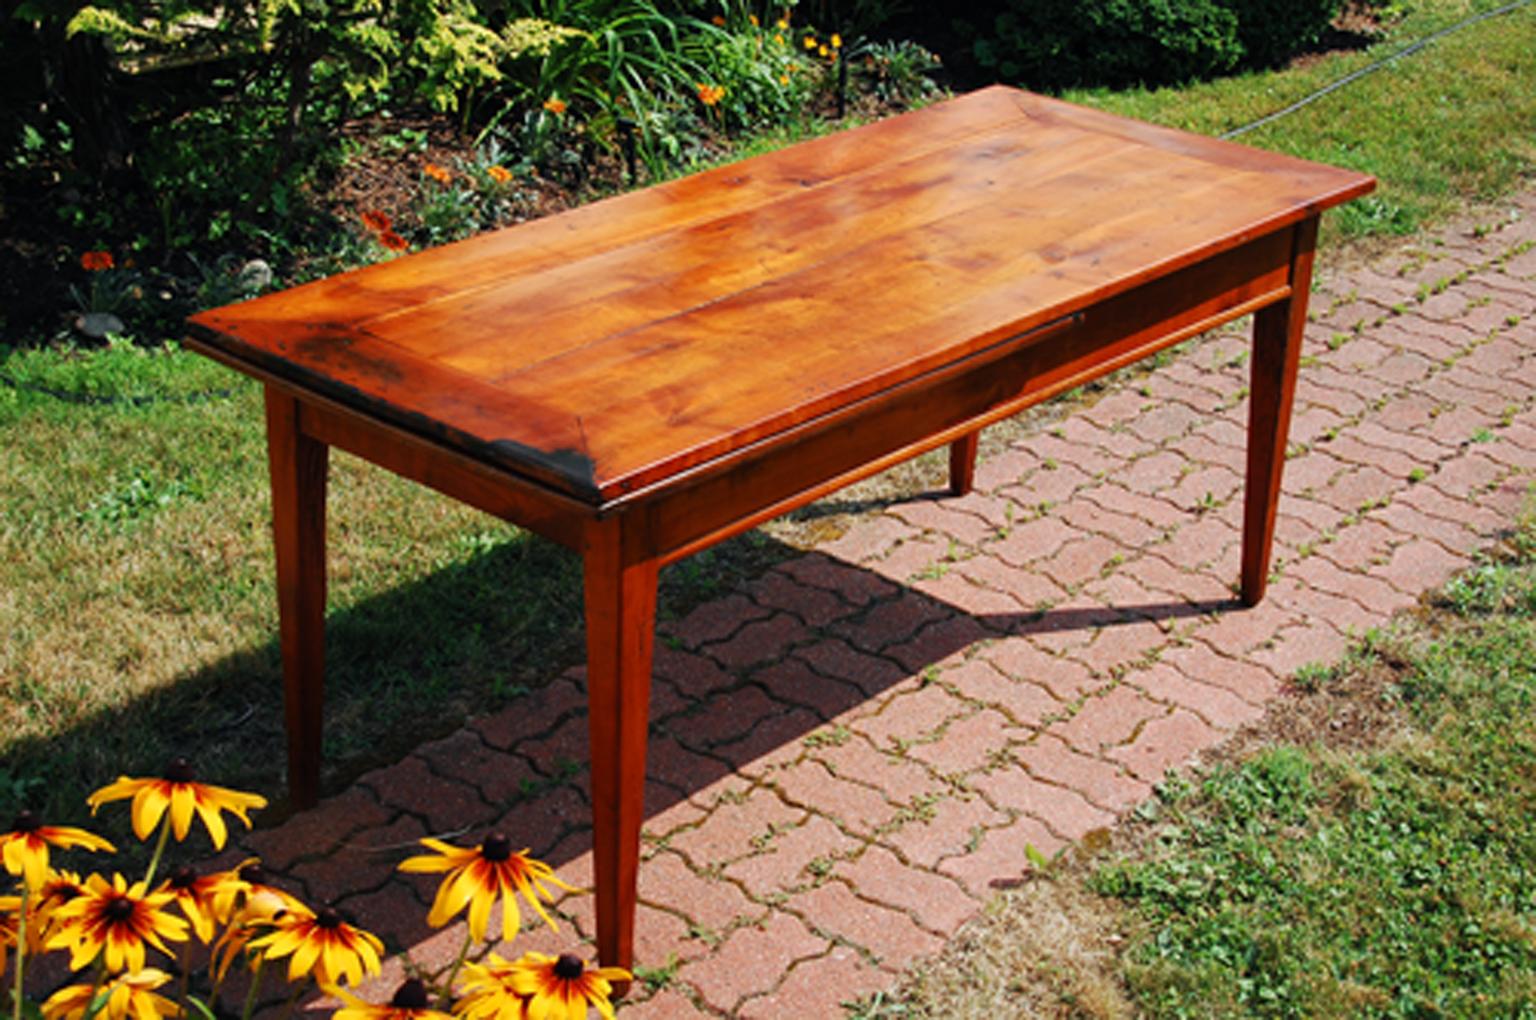 French provincial cherry mid 19th century farmhouse table.  This seventy two inch long taper leg table has a chestnut breadboard which slides out from one long end of the table for an additional twenty three inches of length.  It can be used not